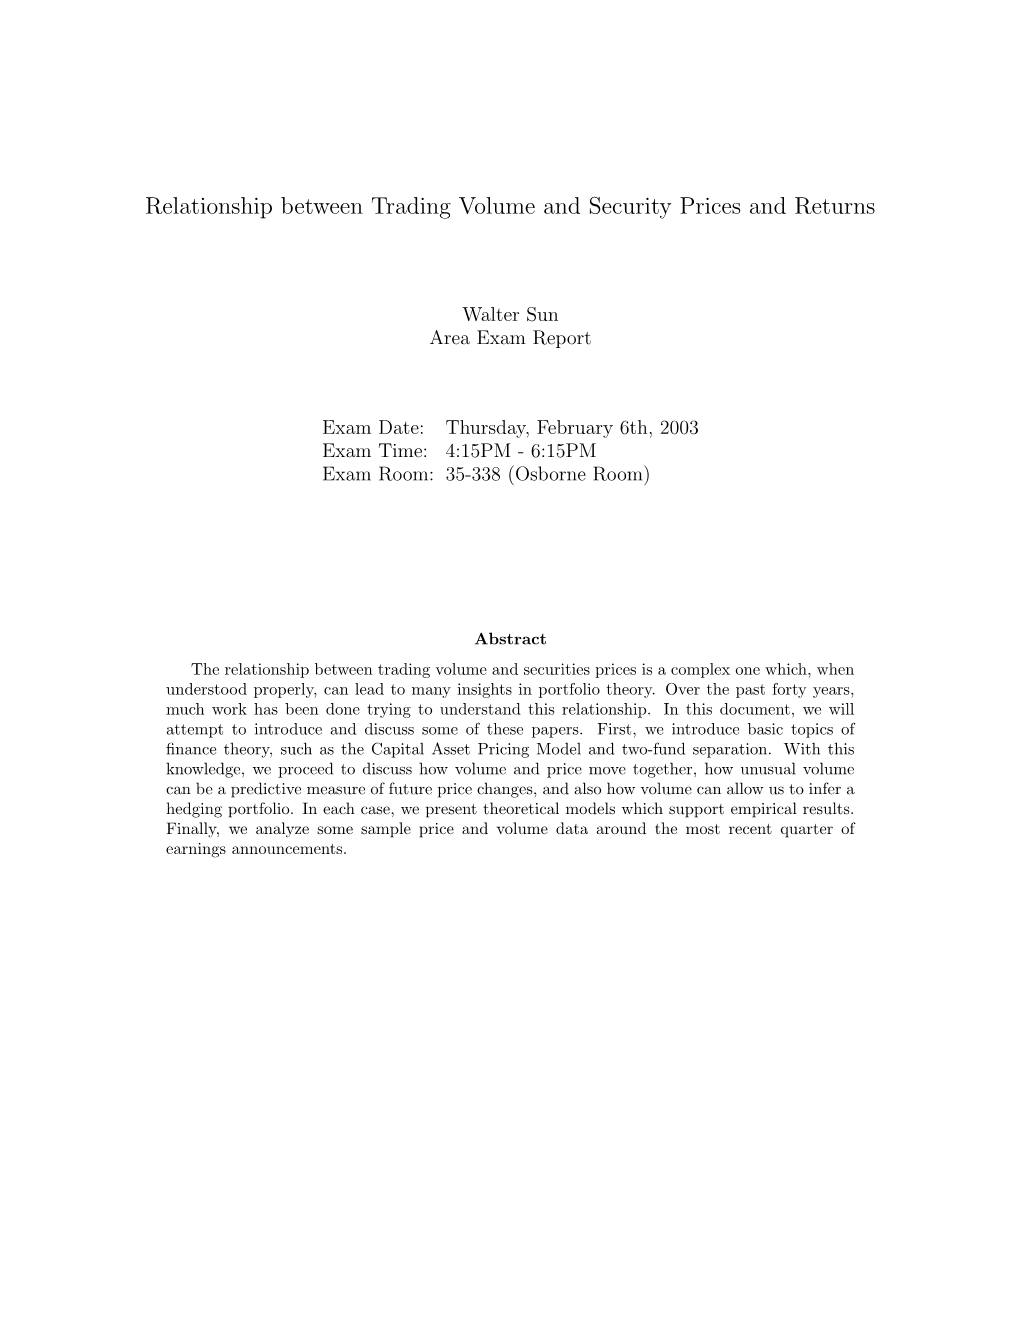 Relationship Between Trading Volume and Security Prices and Returns